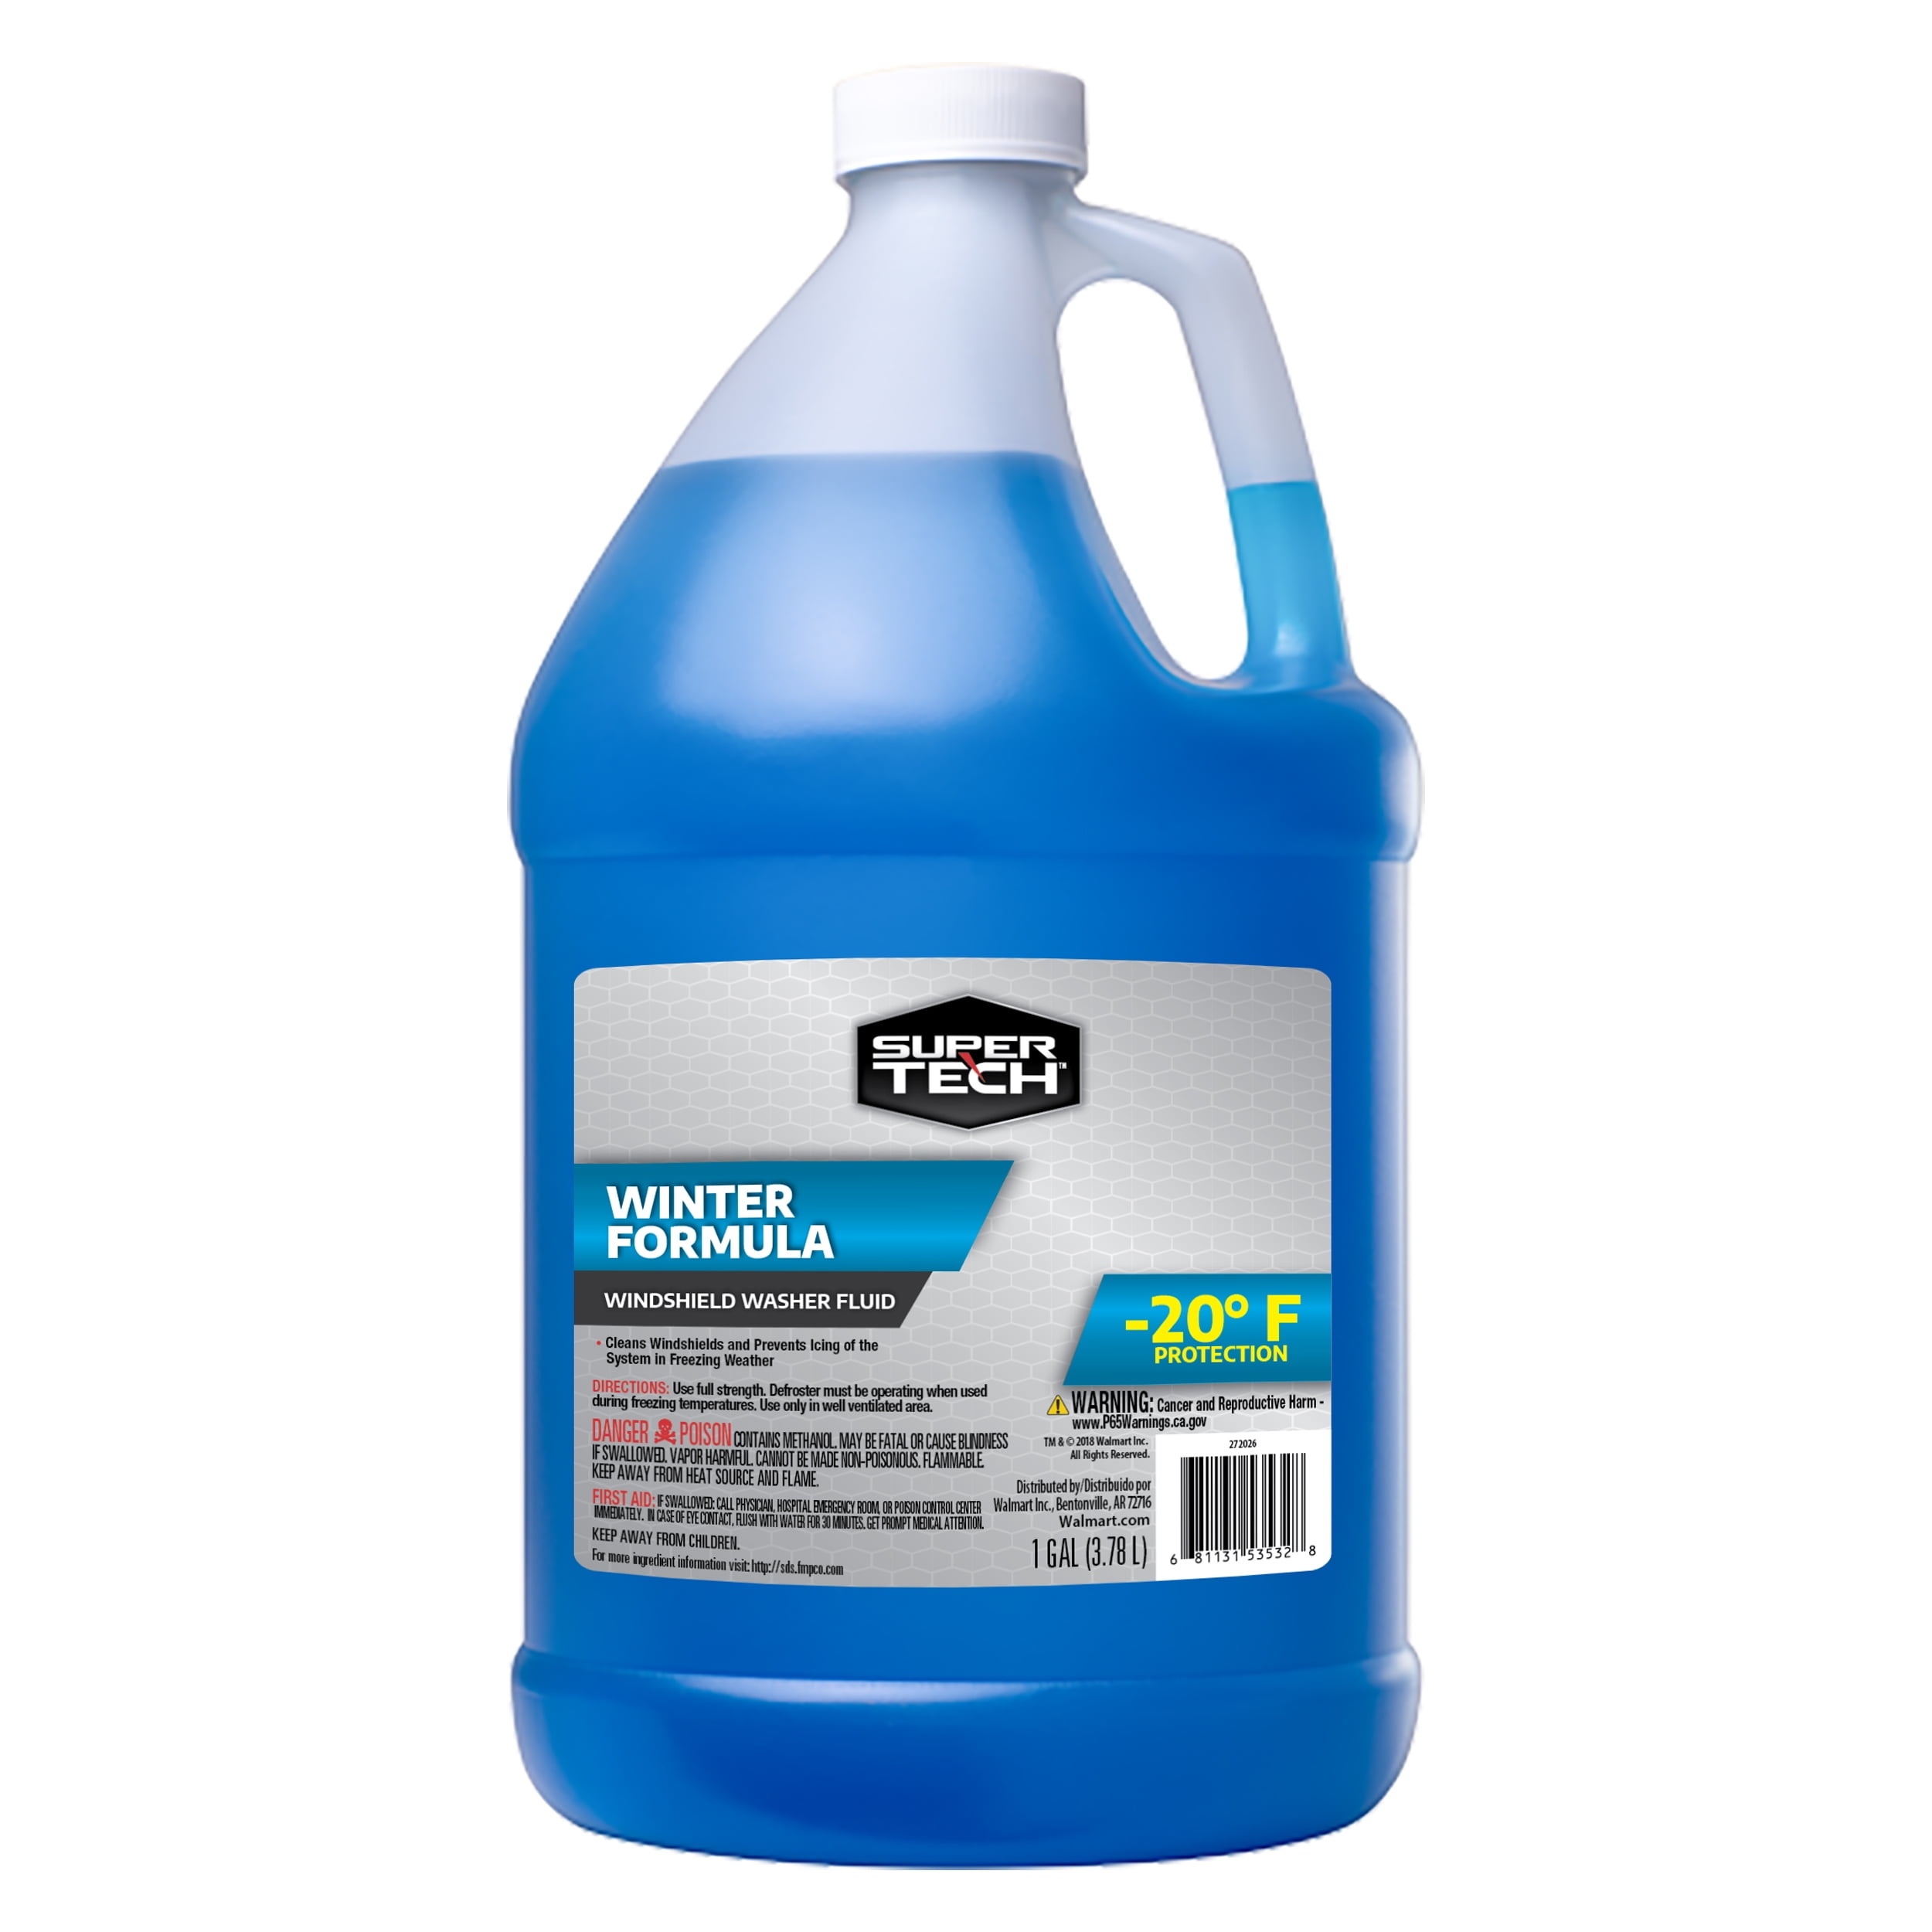 Windshield Washer Fluid Concentrate 100ml - Anti-Freeze, De-Icing Form –  Wavex